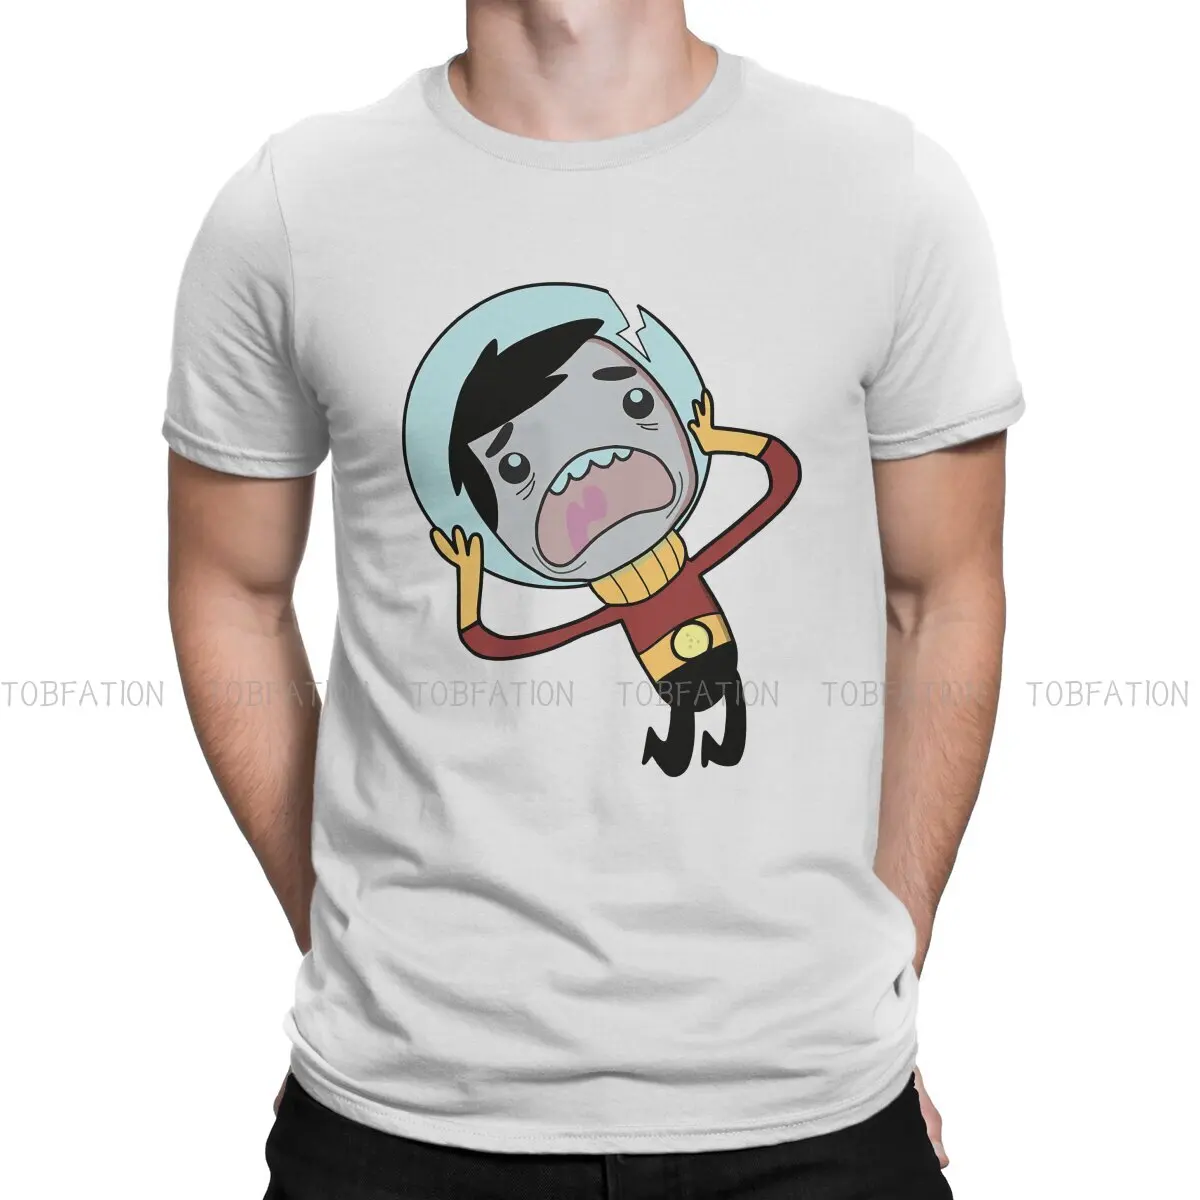 

Oxygen Not Included TShirt for Men Ah Soft Casual Tee T Shirt Novelty New Design Loose